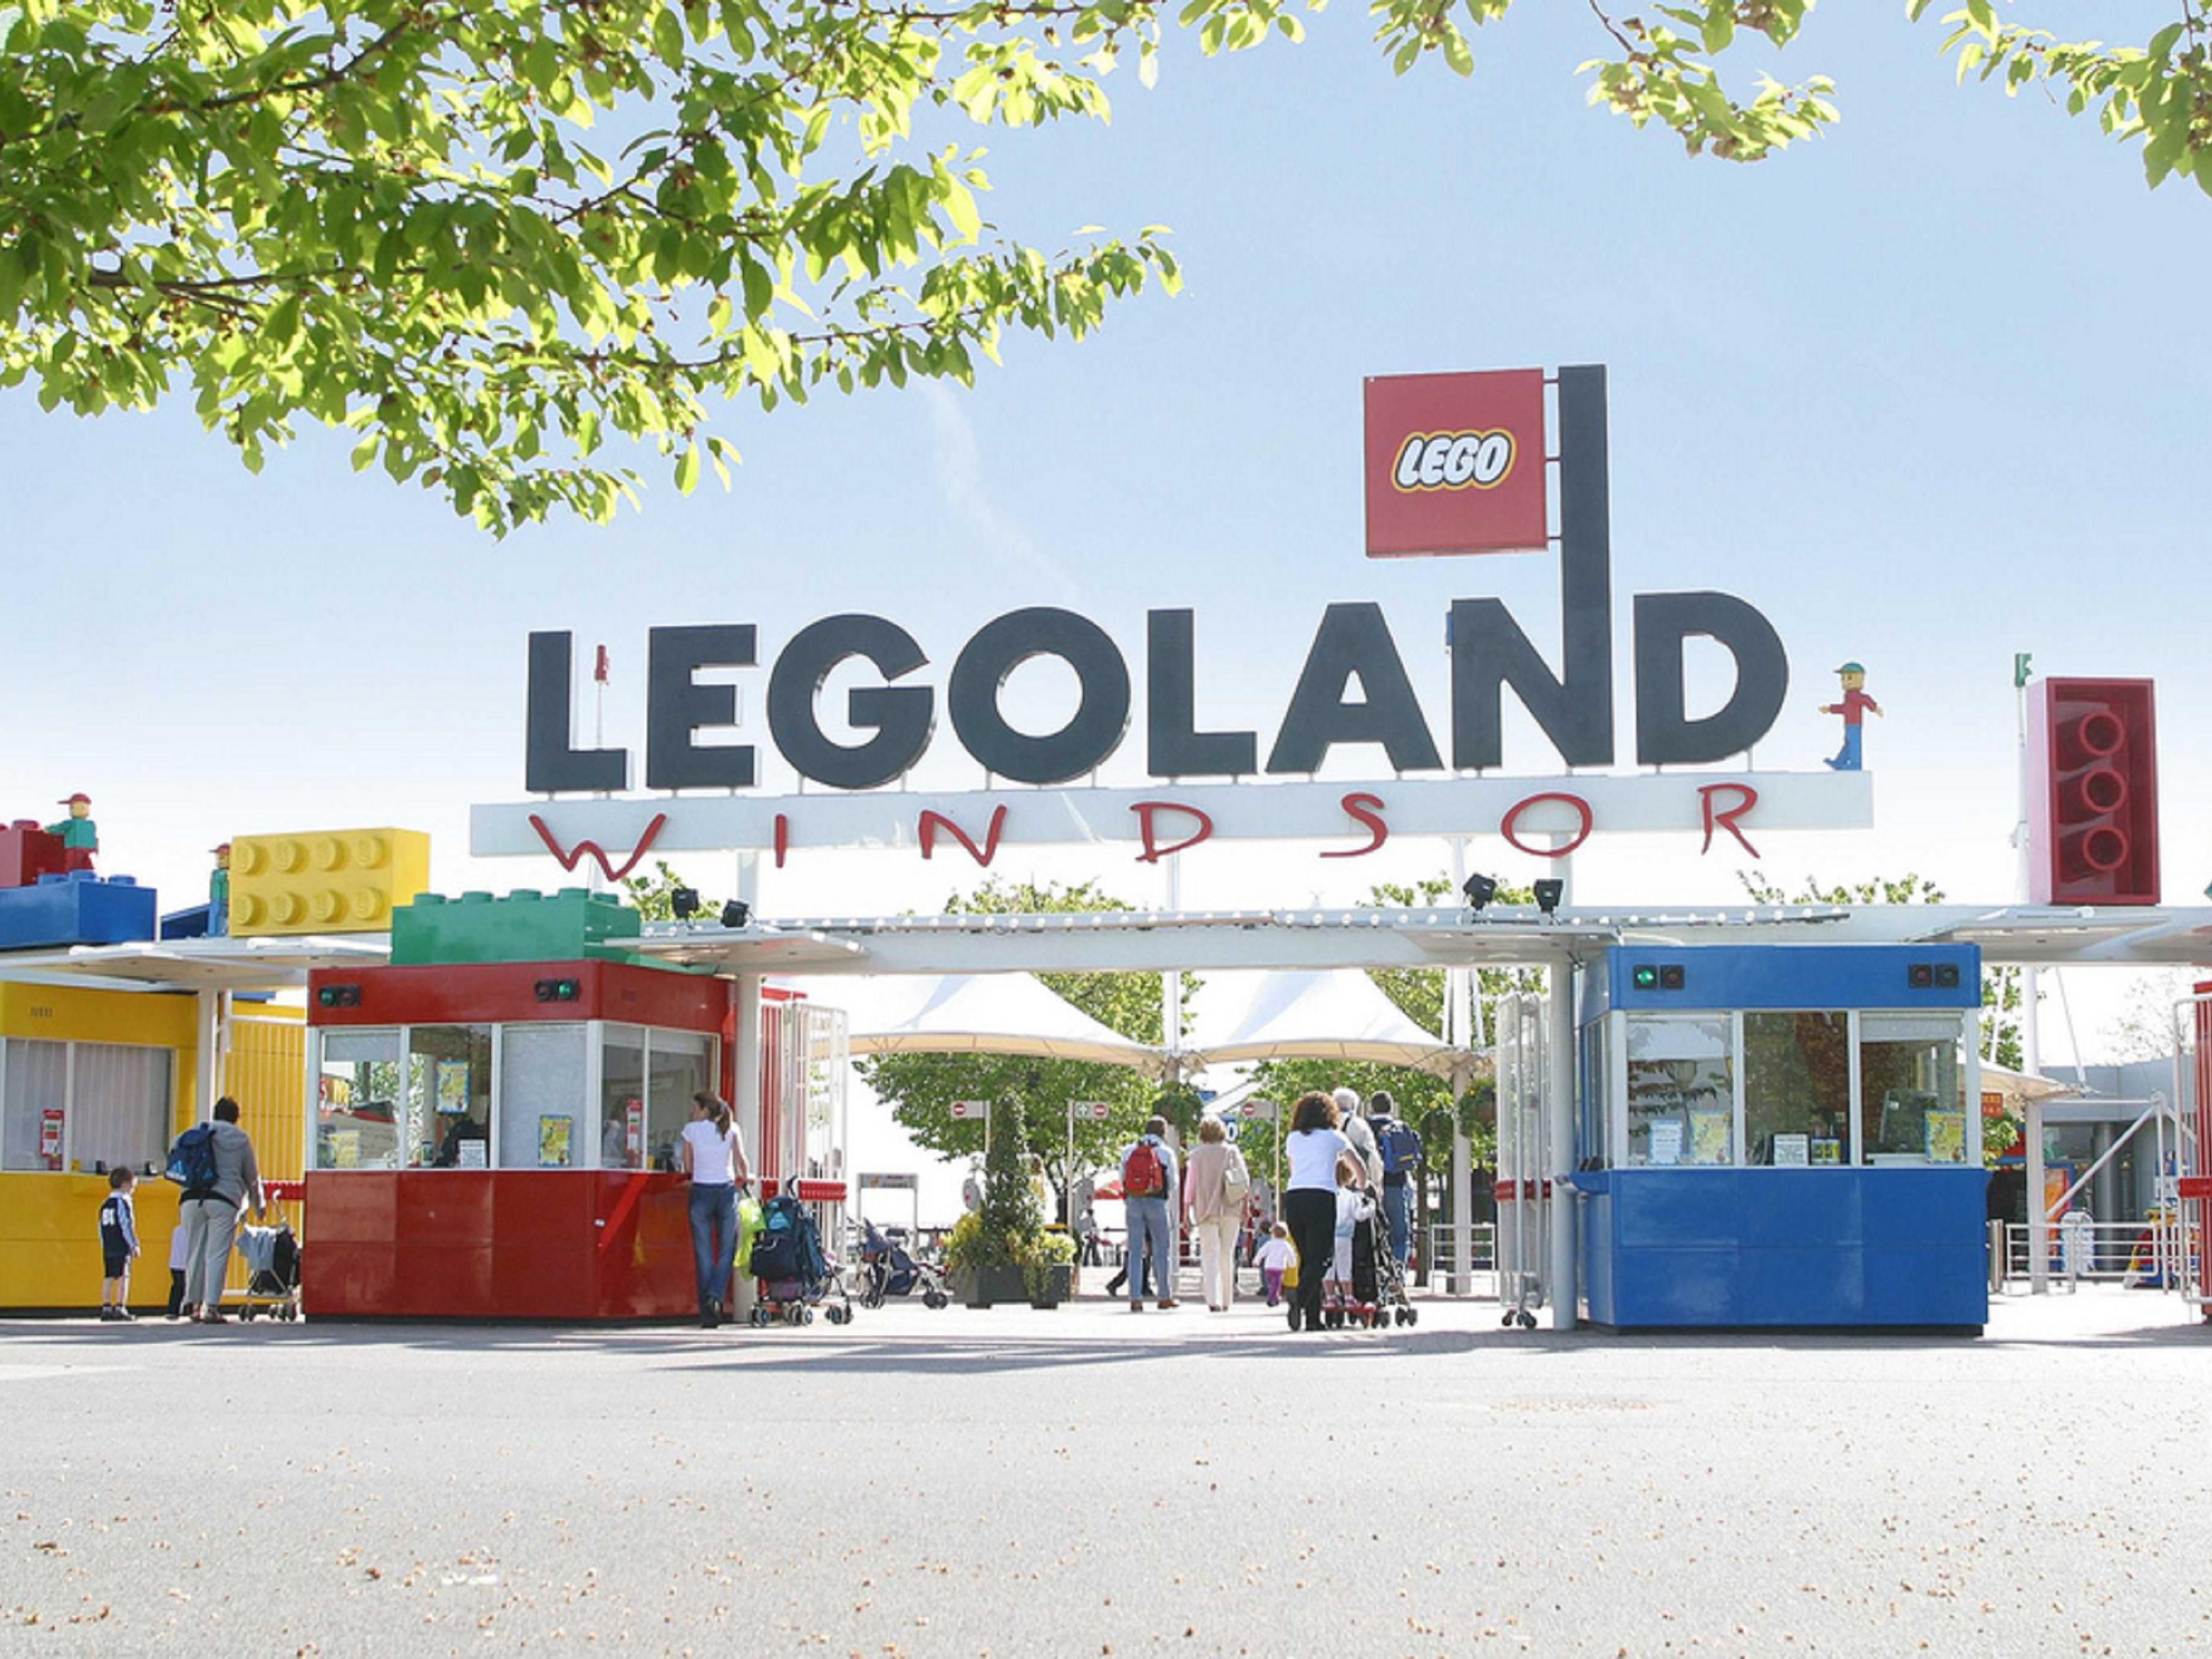 Kids and adults alike love Lego, and with Legoland Windsor Resort just a short drive away, it’s the perfect day out! 